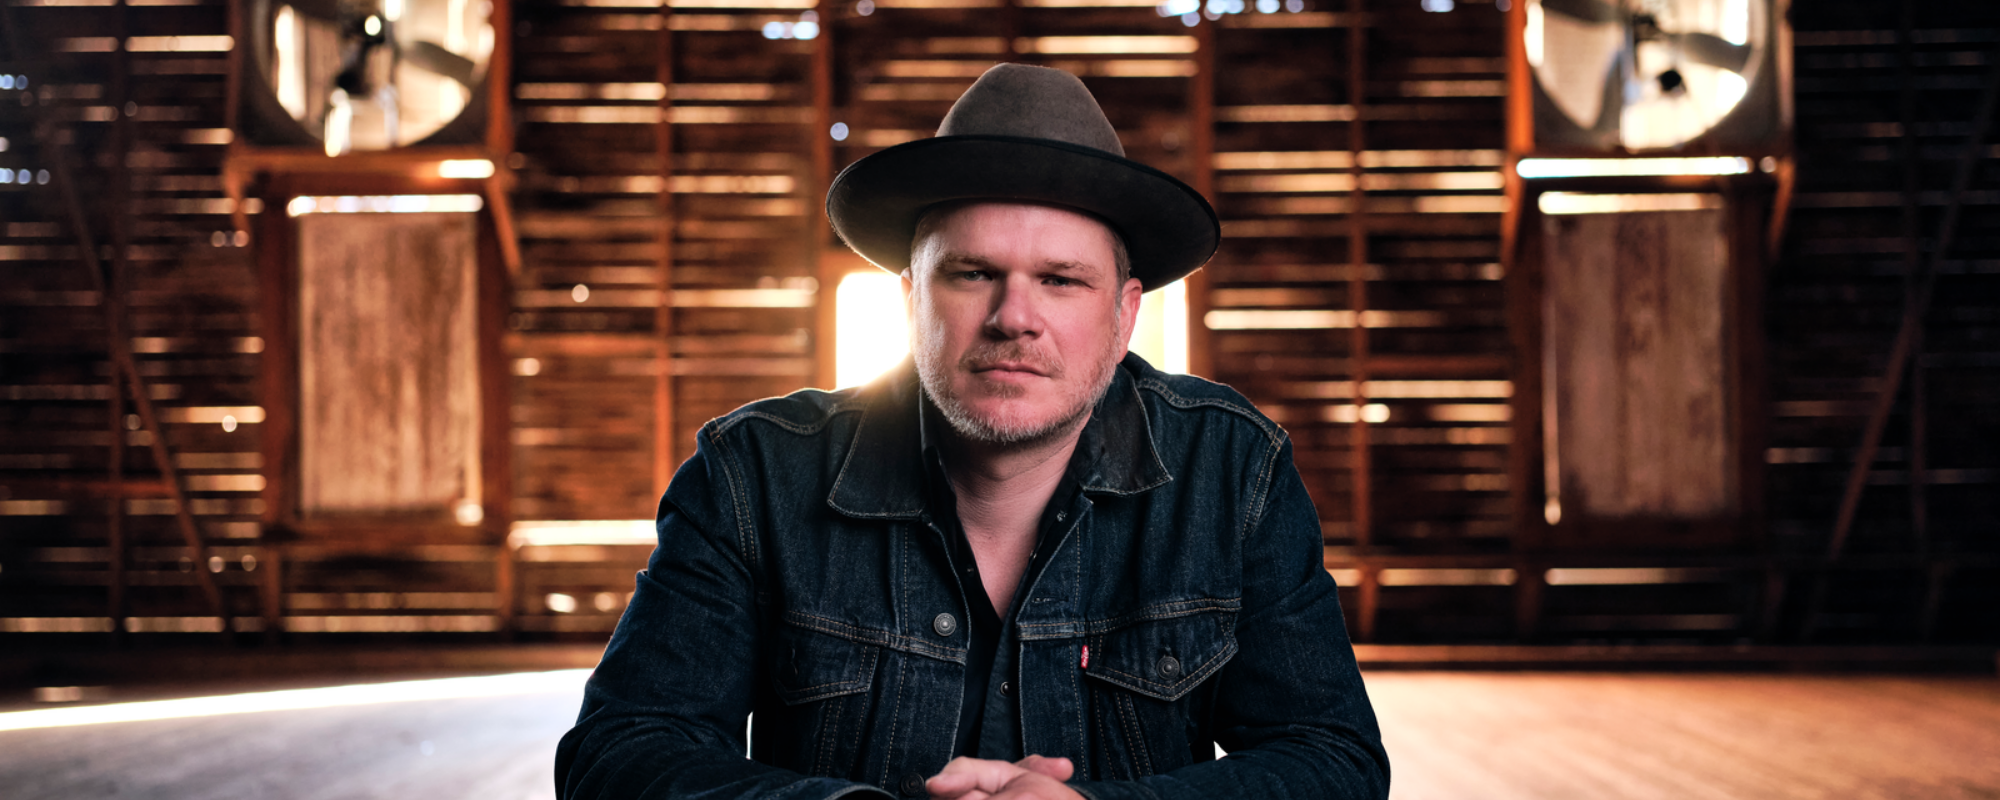 Jason Eady’s Candid Response: ‘To The Passage of Time’